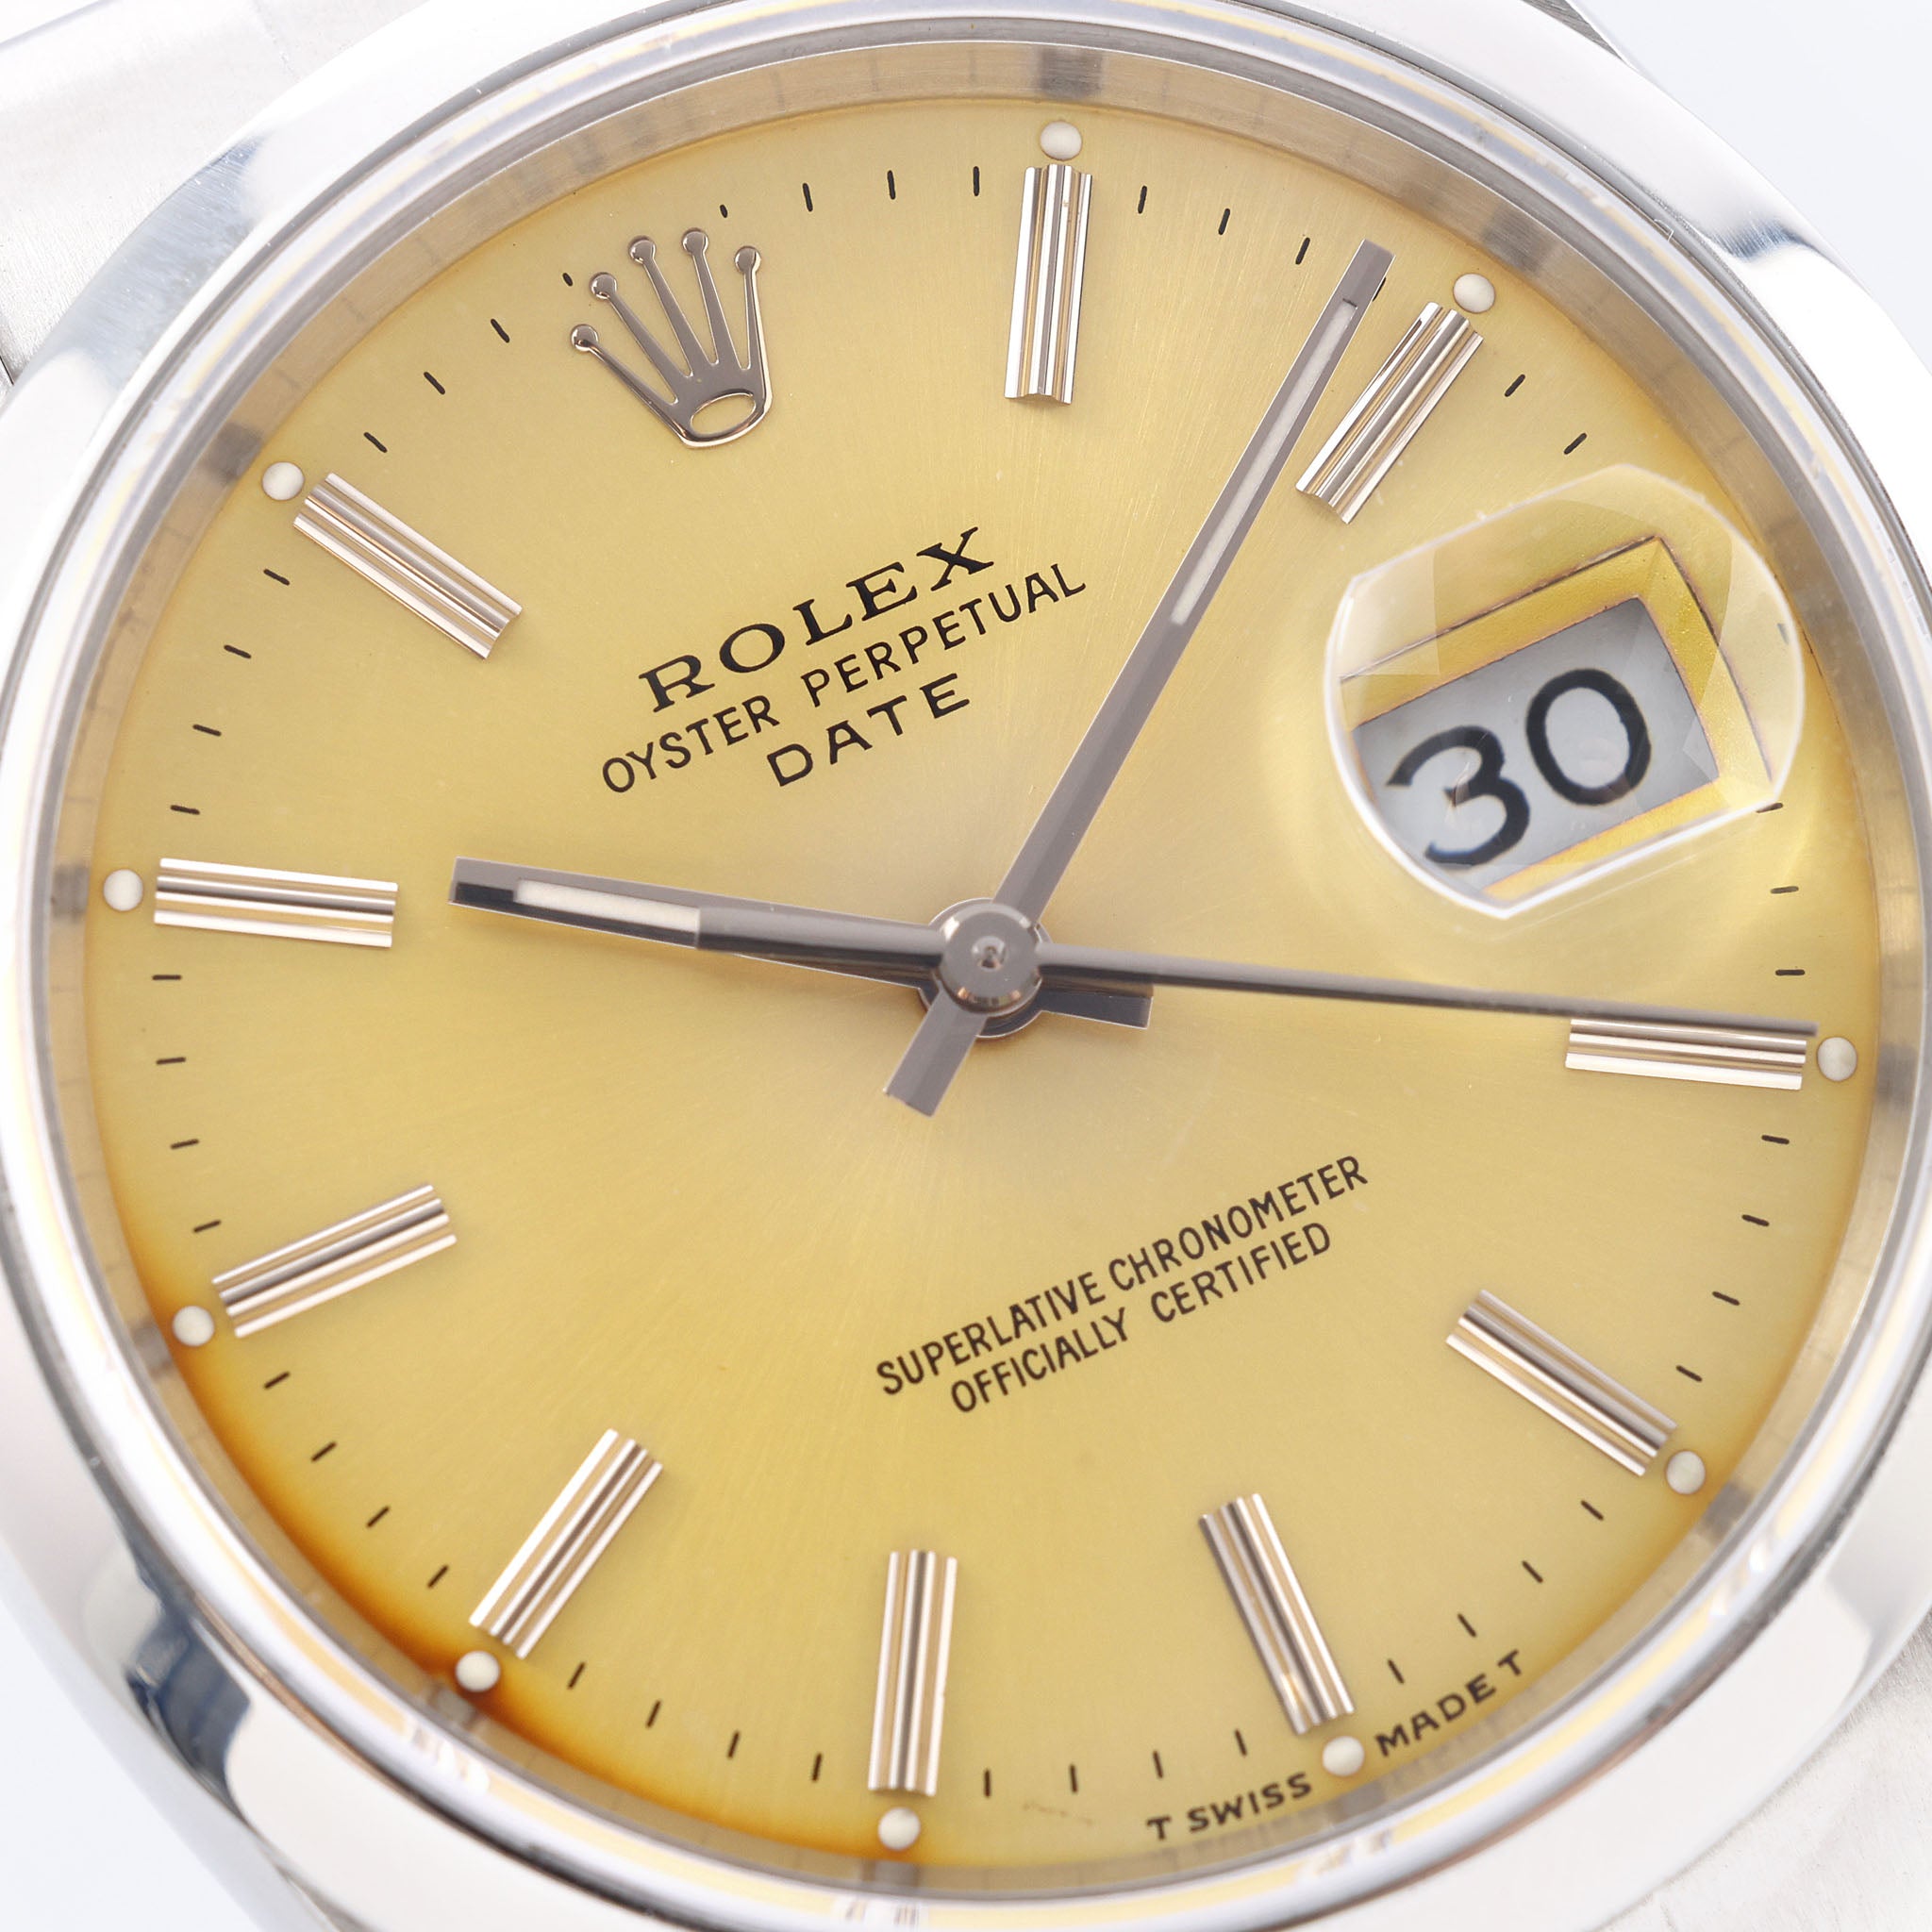 Rolex Oyster Perpetual Date Colour Change Dial Ref 15200